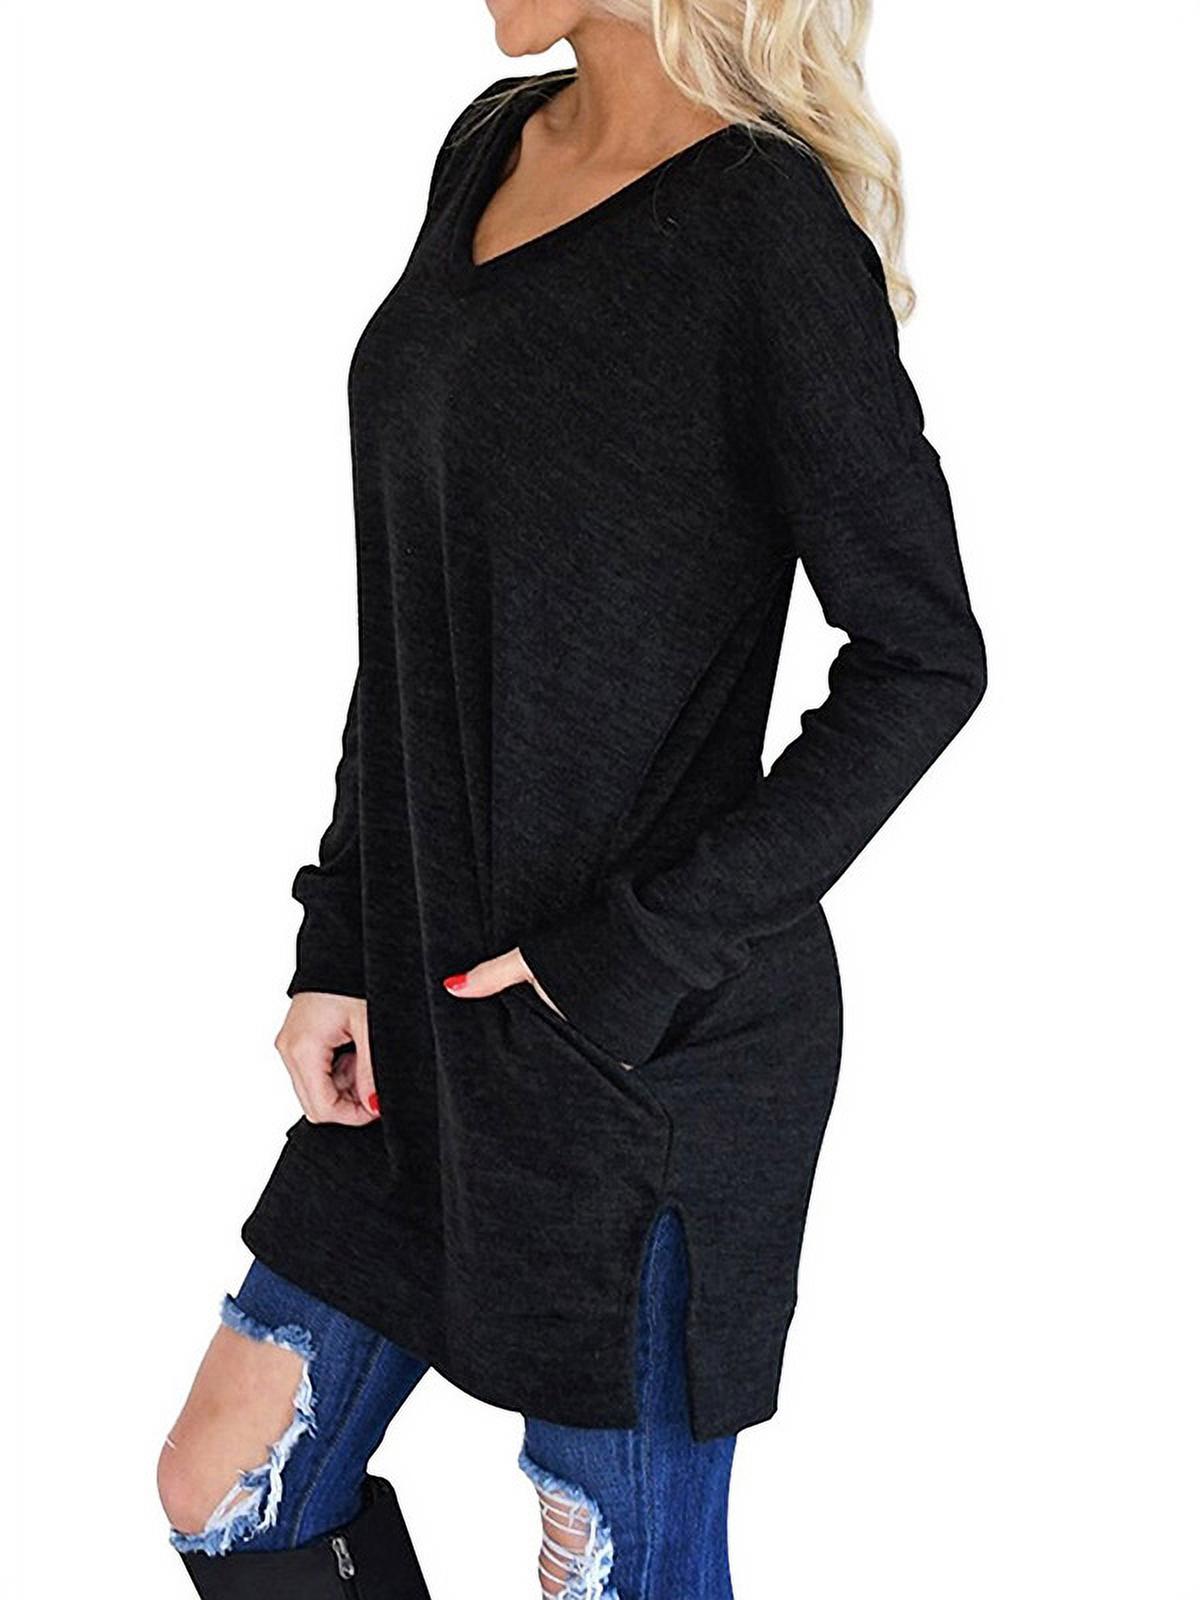 Women V-Neck Long Sleeves Pure Color Pocket Top - image 4 of 6